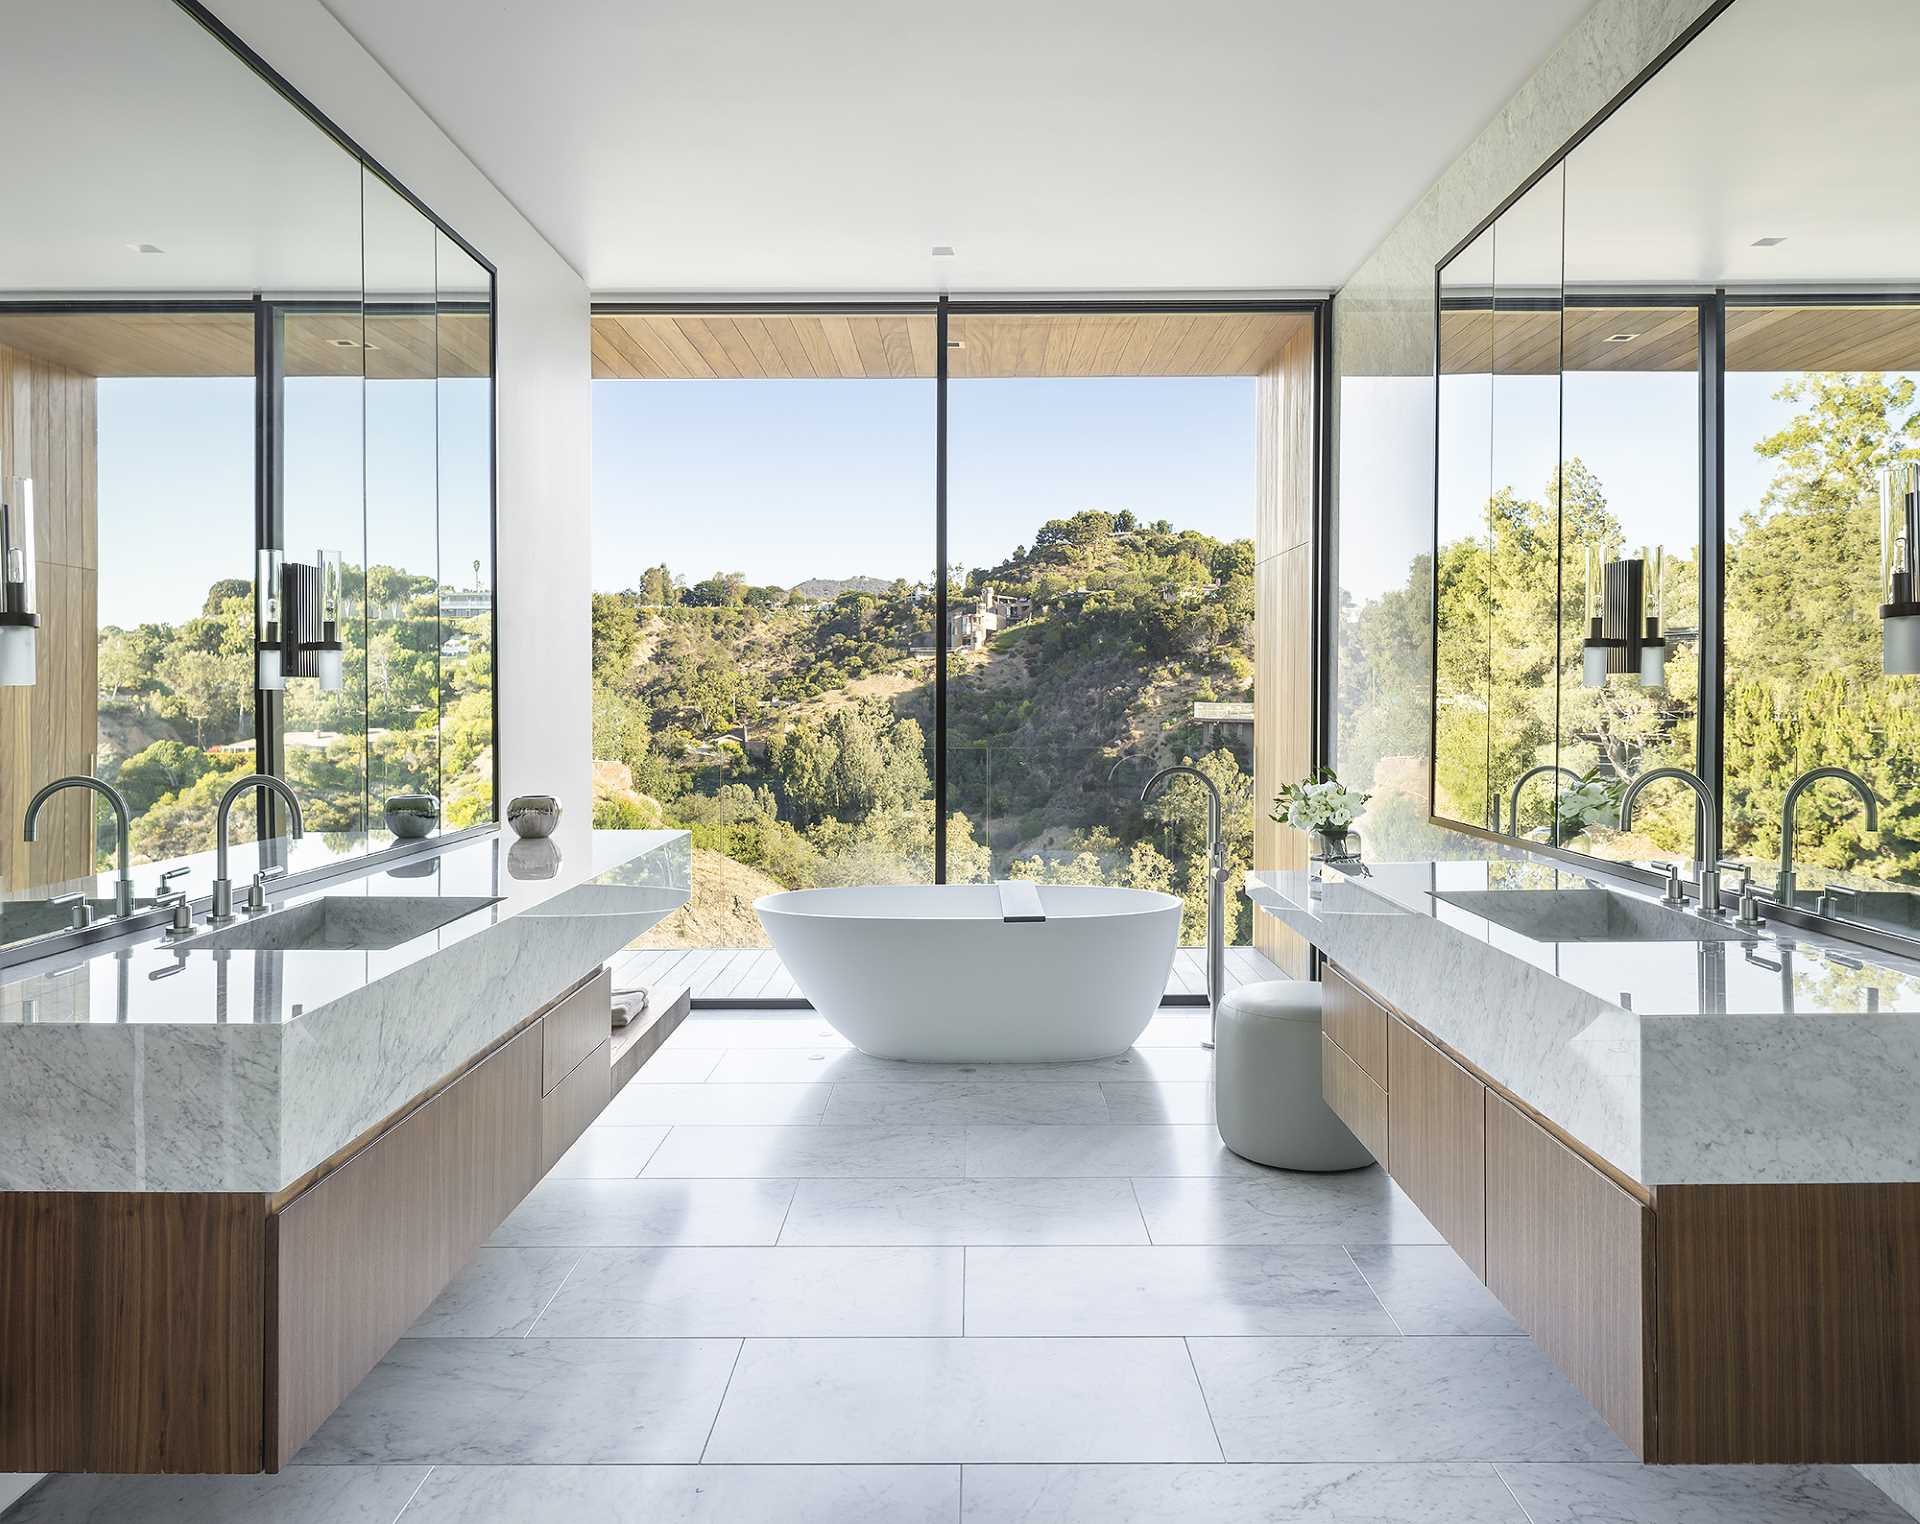 In this modern primary bathroom, floor to ceiling windows provide valley views from the bathtub, while the floating dual vanities are located on either side of the room.